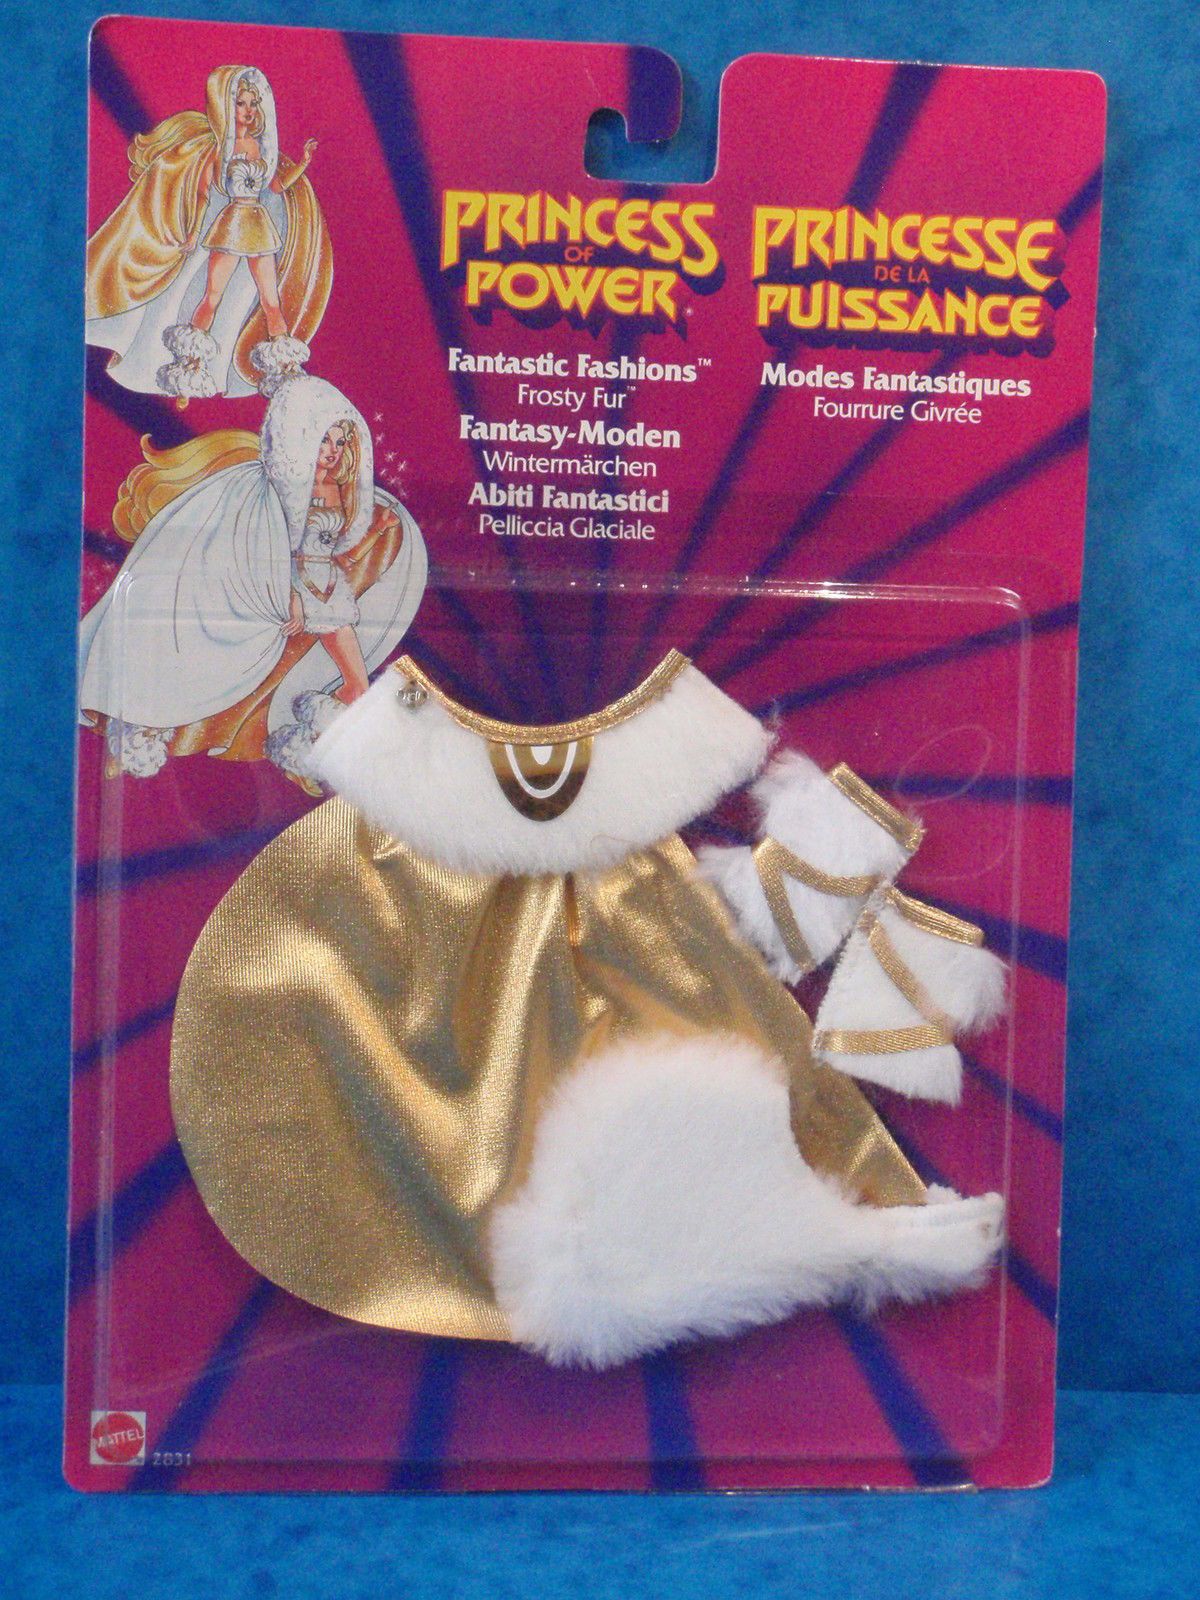 She-Ra: Princess of Power (1985) - (figures, dolls, toys and objects) 62